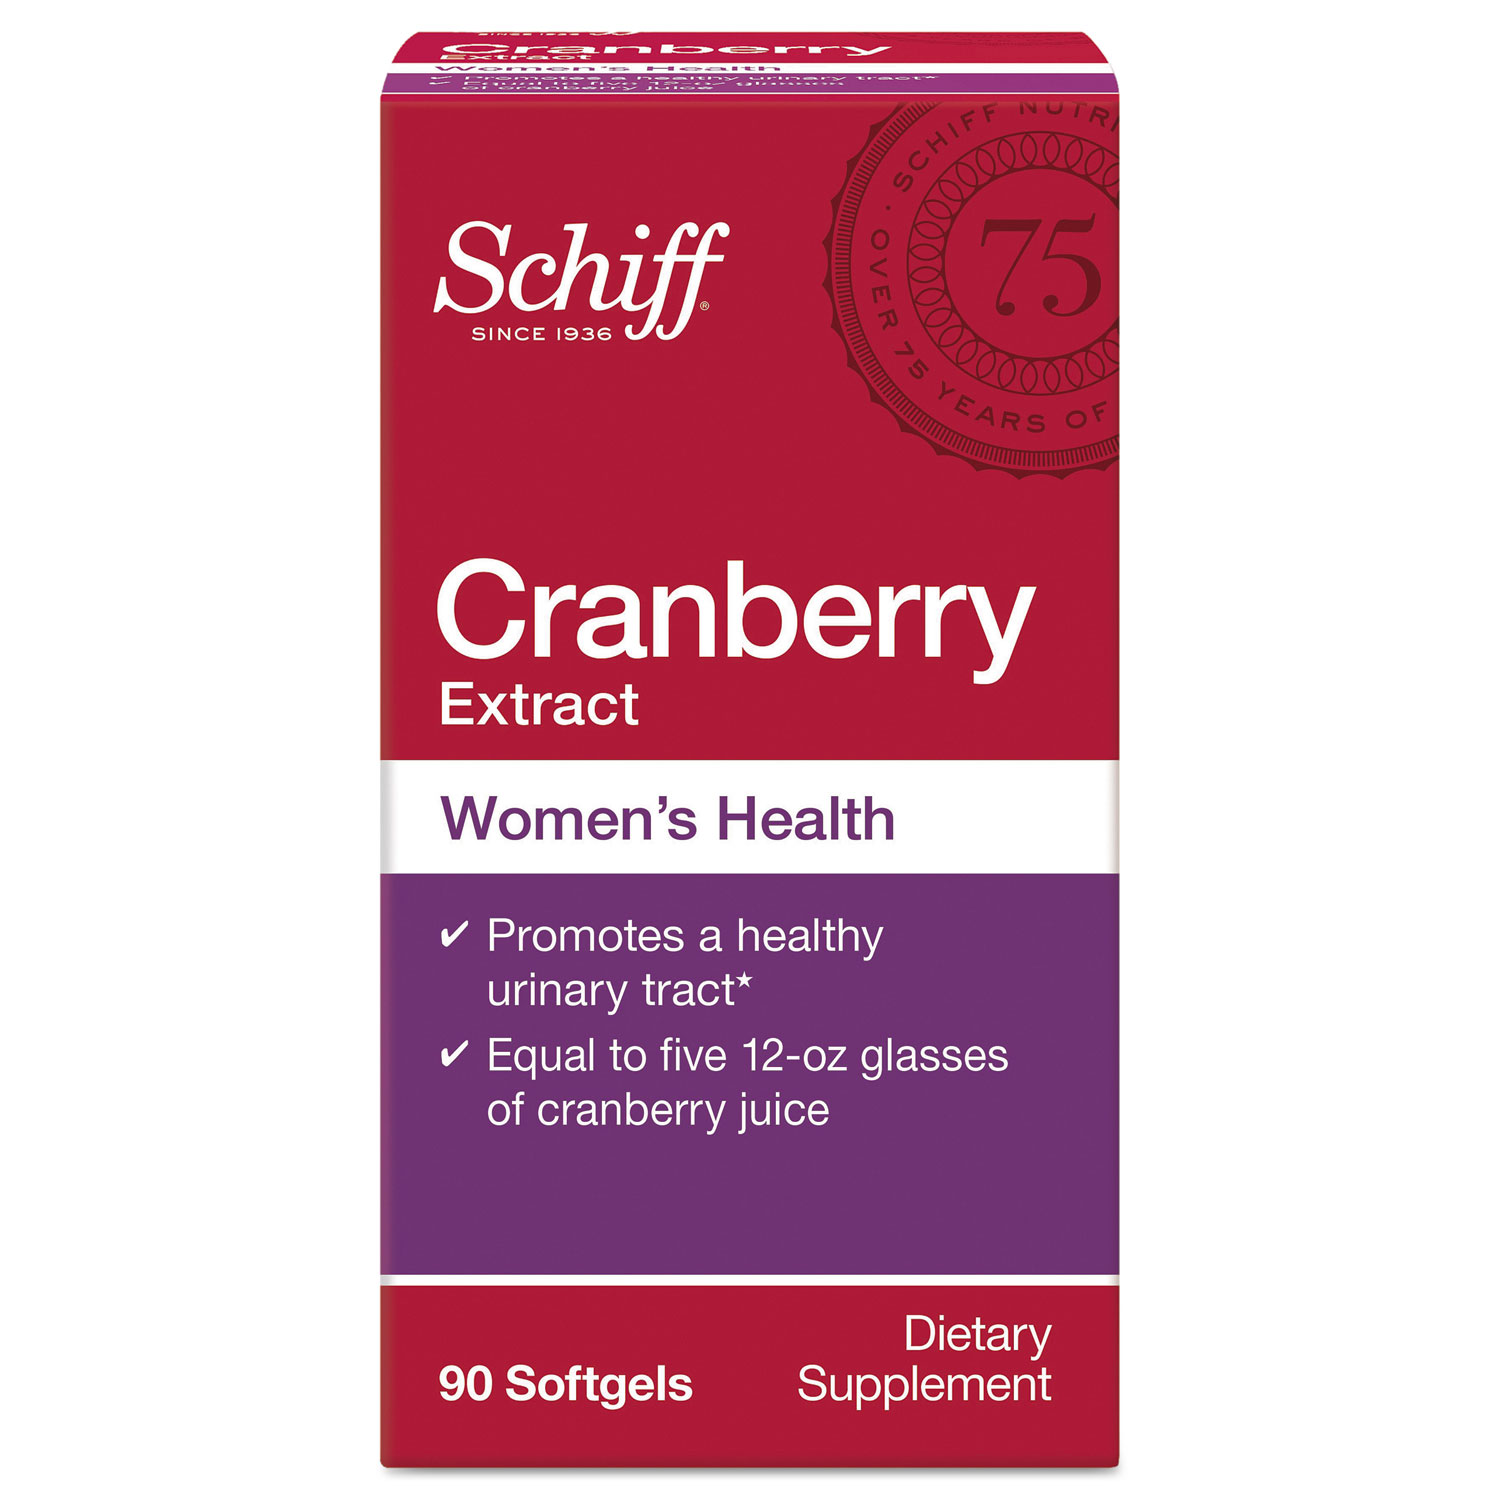 Cranberry Extract Softgel, 90 Count